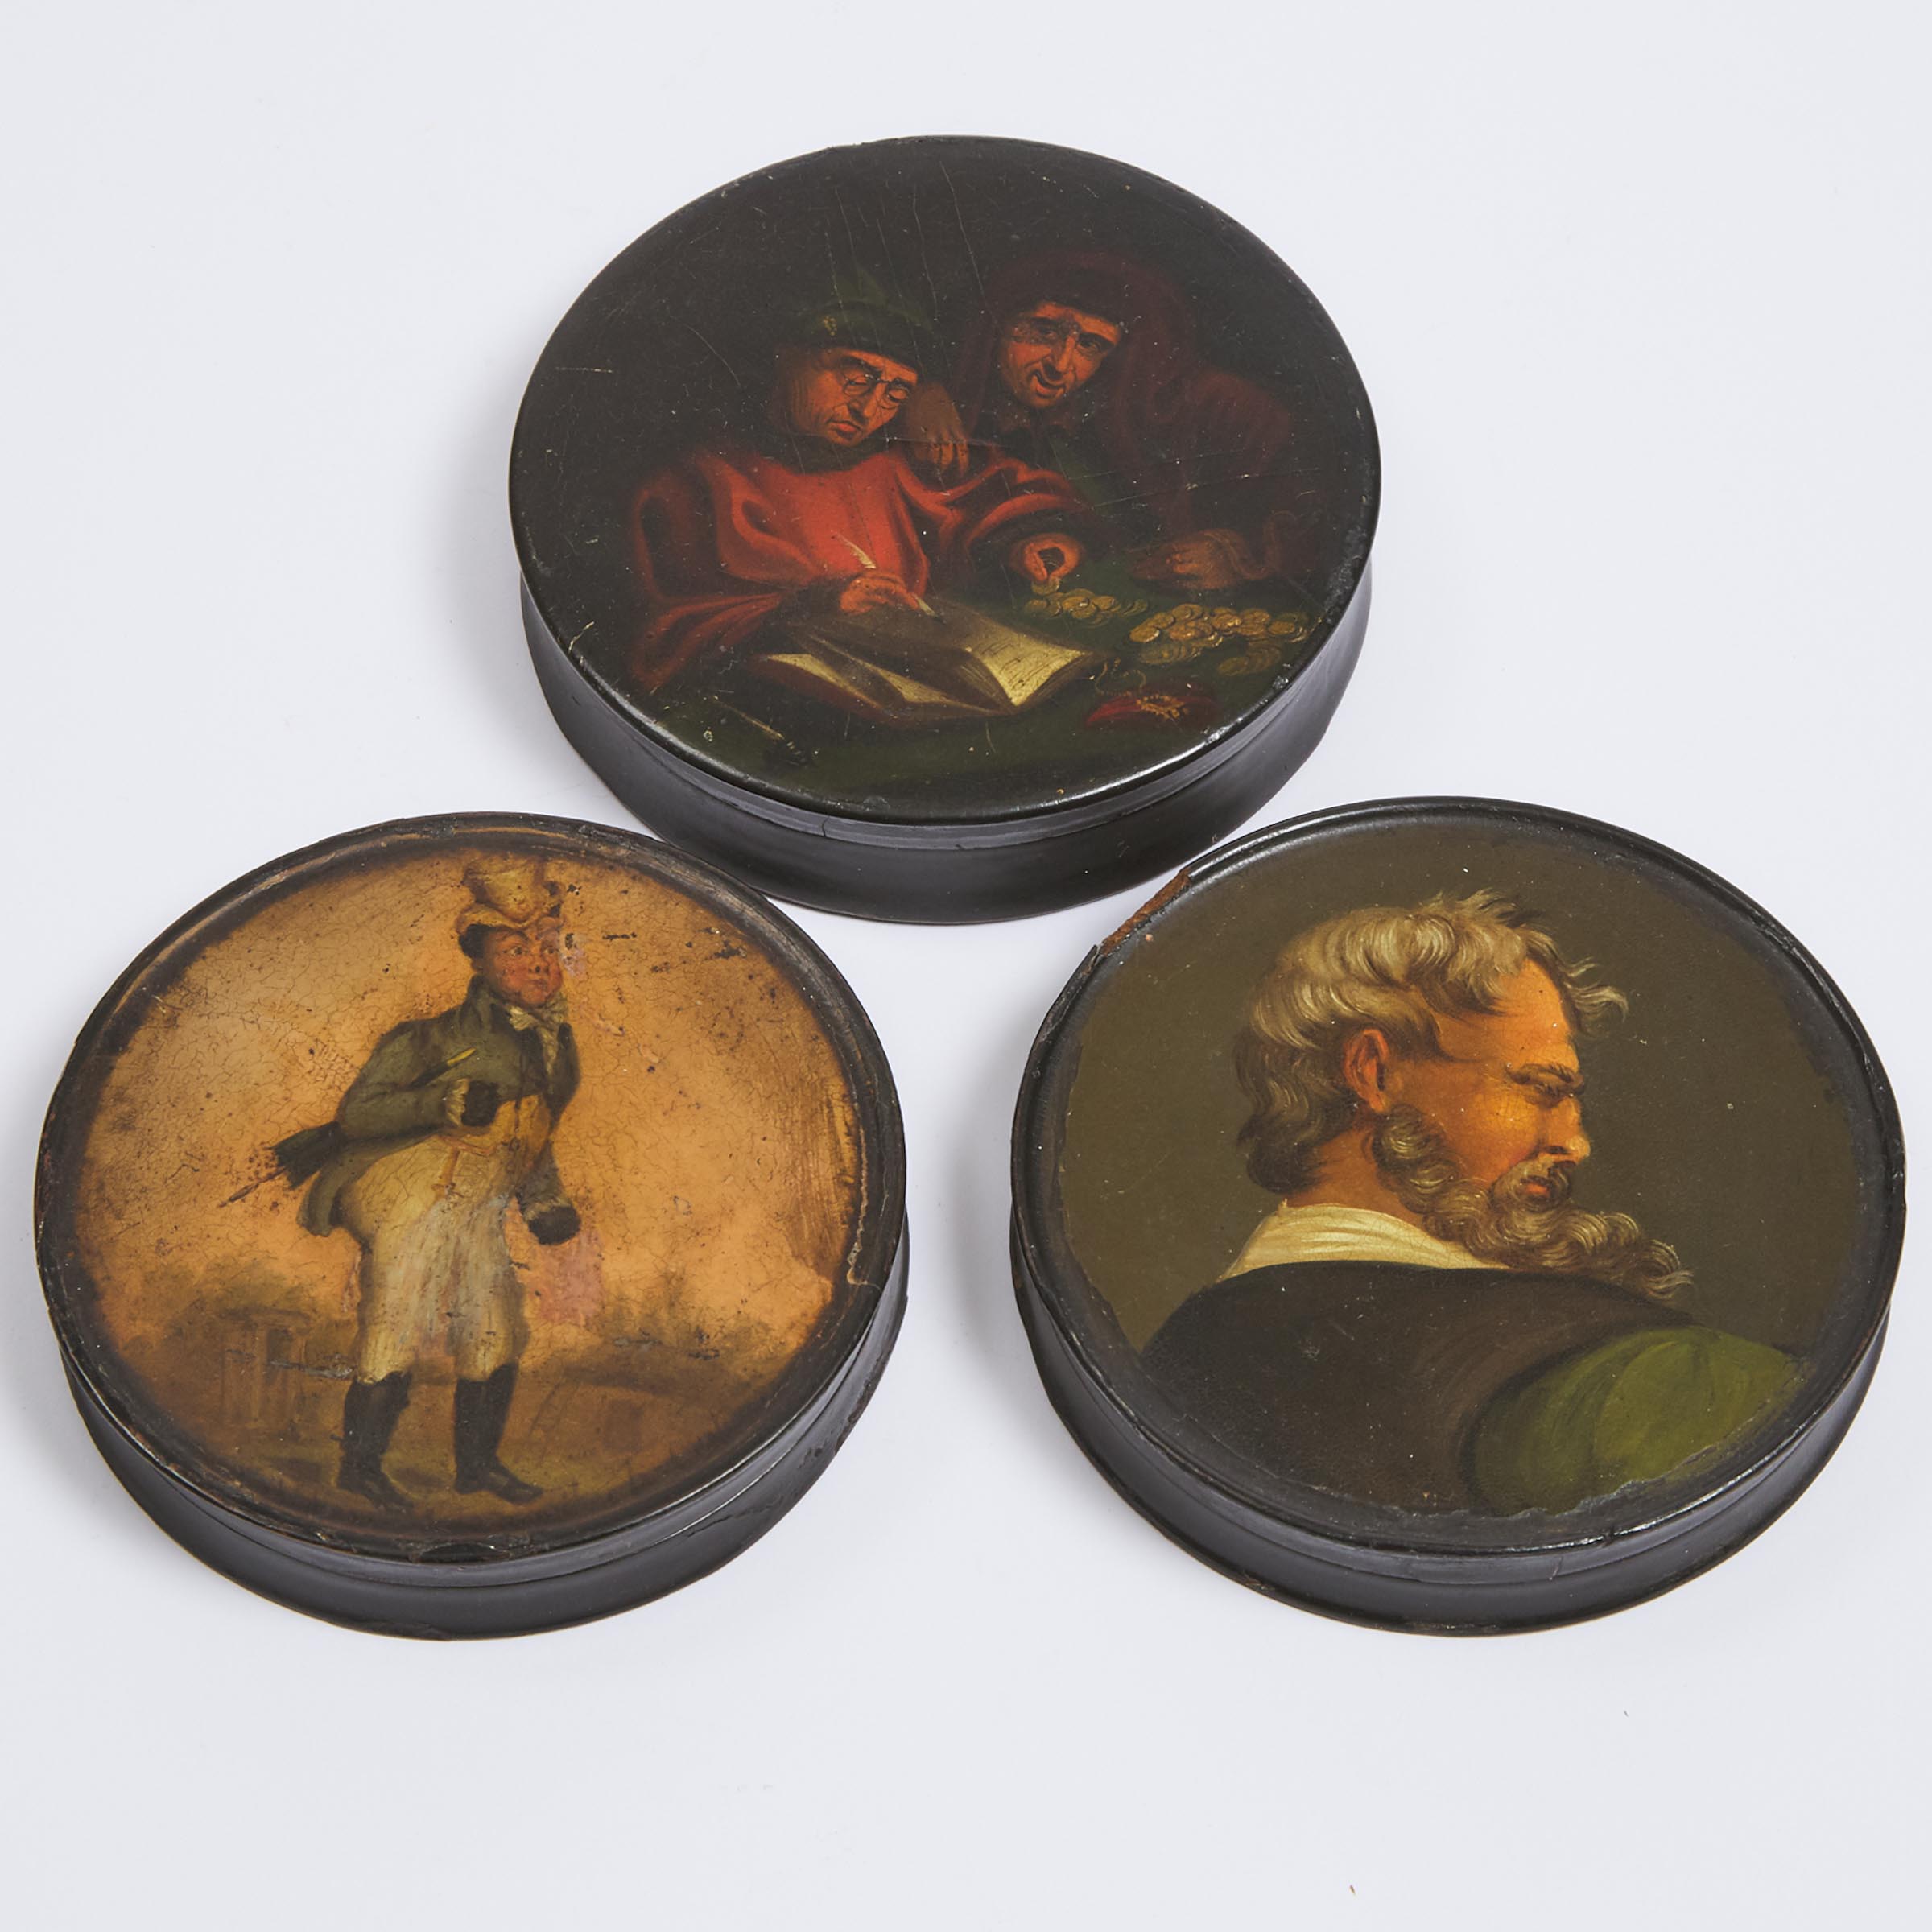 Three North German Painted Lacquer Round Snuff Boxes, early 19th century